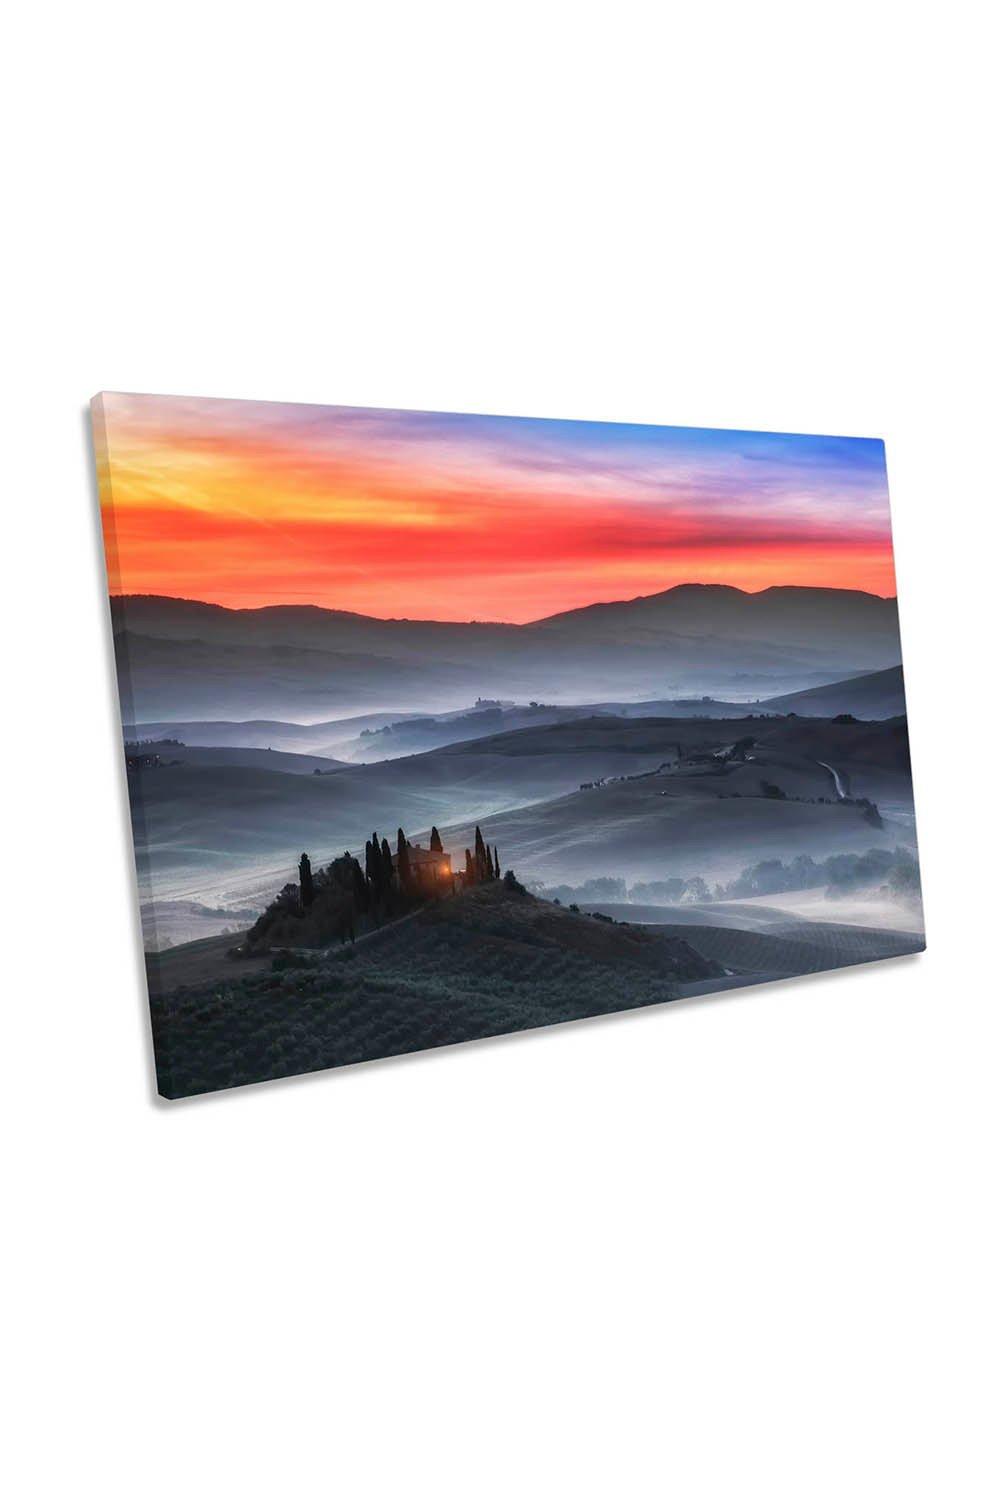 Tuscany Italy Sunrise Fog Morning Canvas Wall Art Picture Print